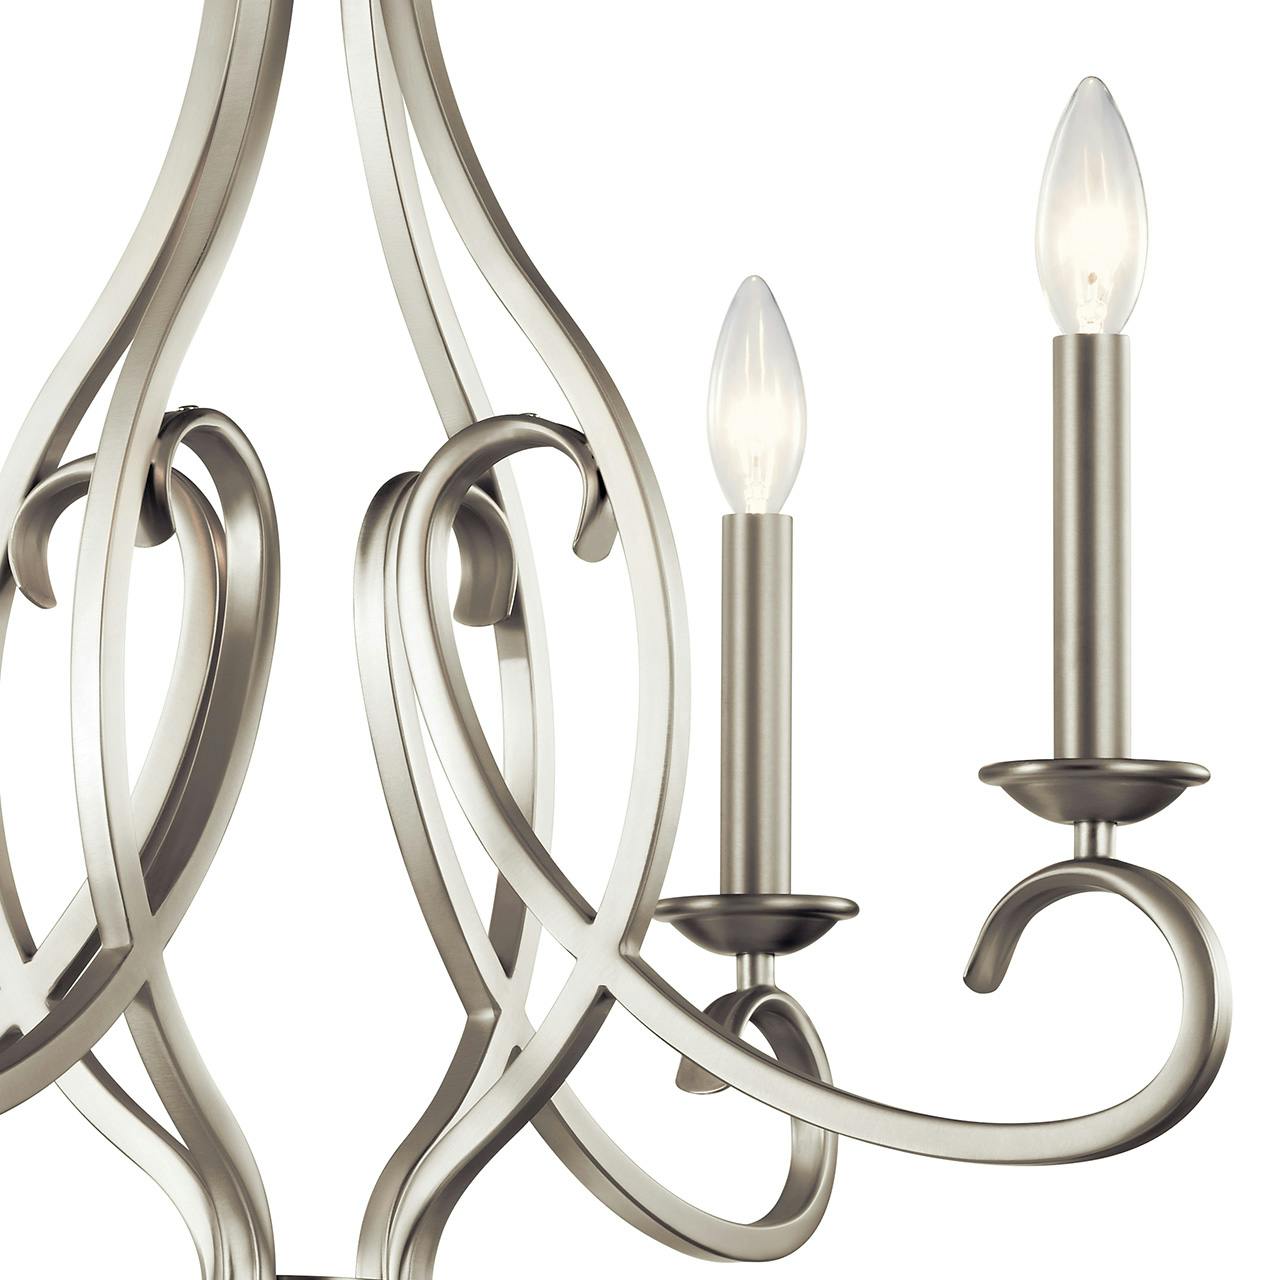 Close up view of the Ania 4 Light Chandelier Brushed Nickel on a white background